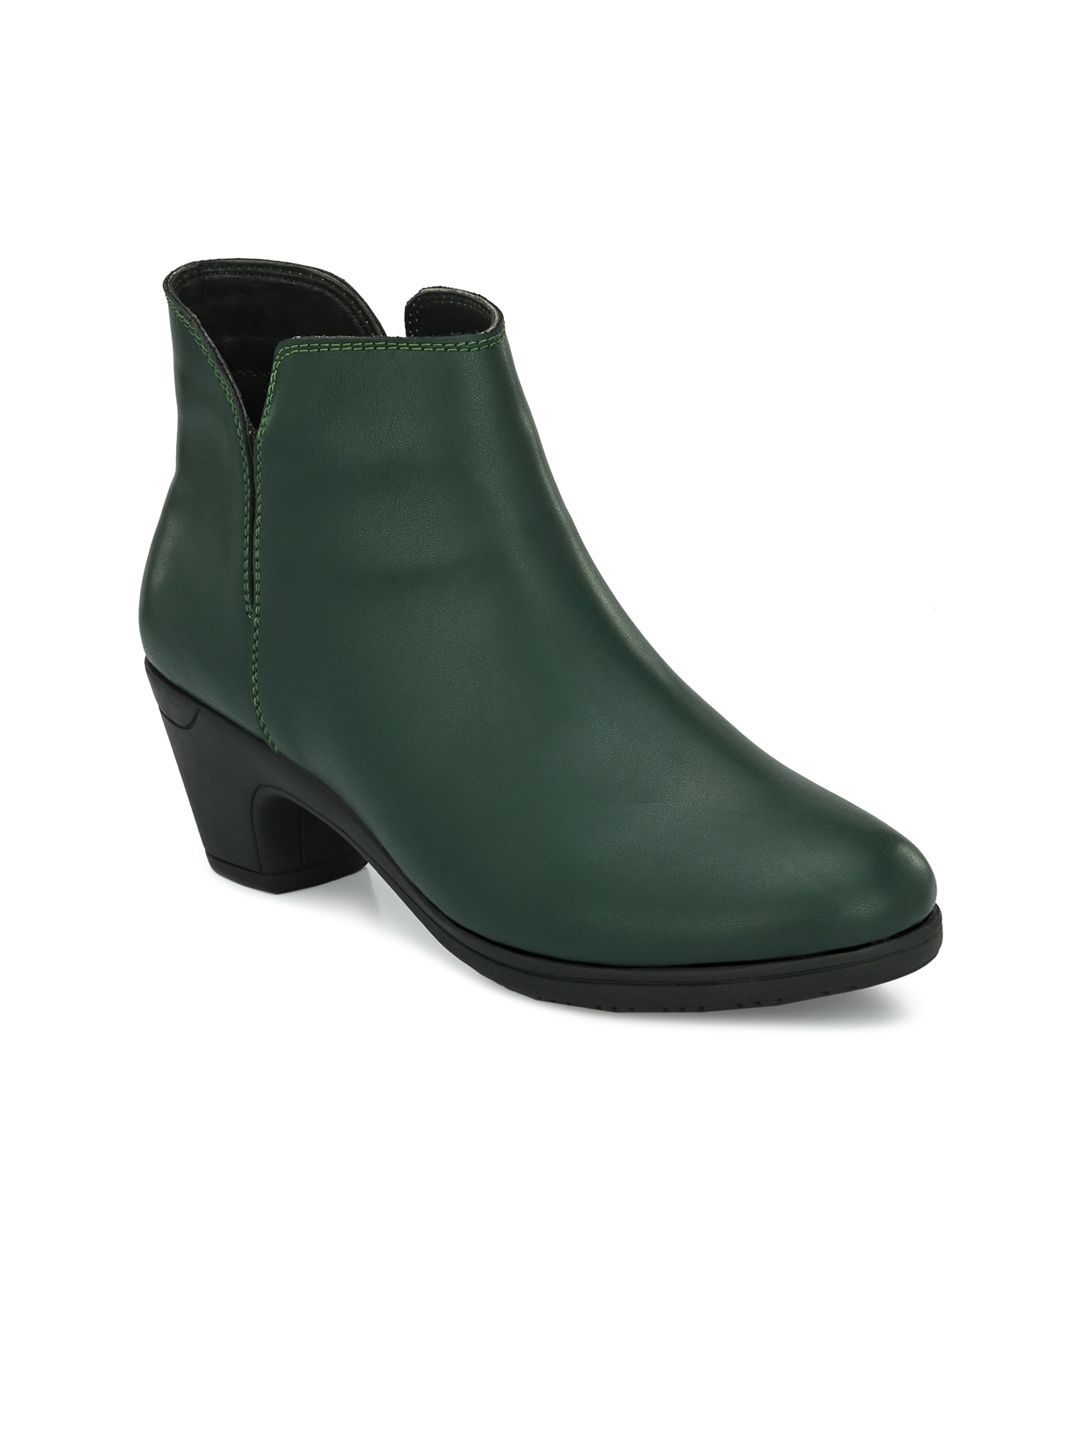 El Paso Green Block Heeled Boots Price in India